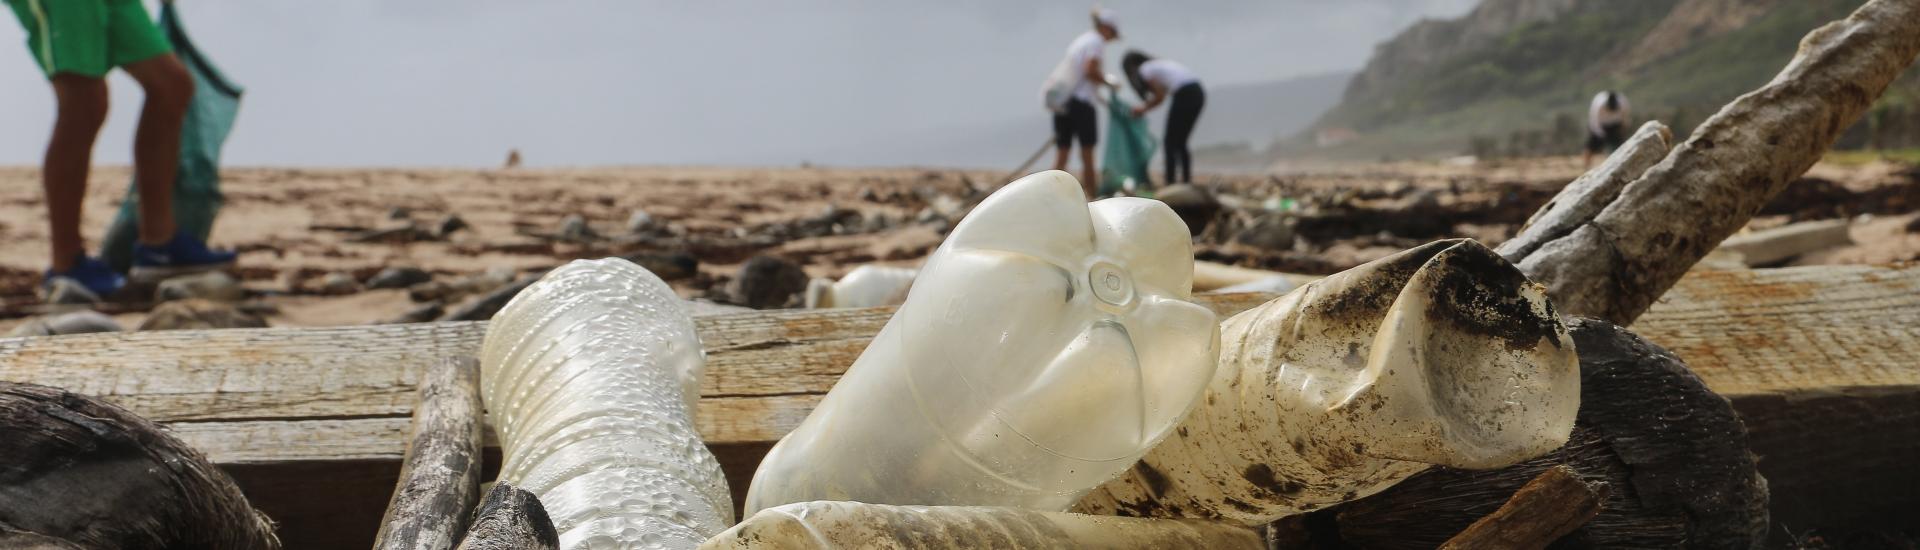 A view of the plastic bottles on the beach and people walking in the background on a beach clean